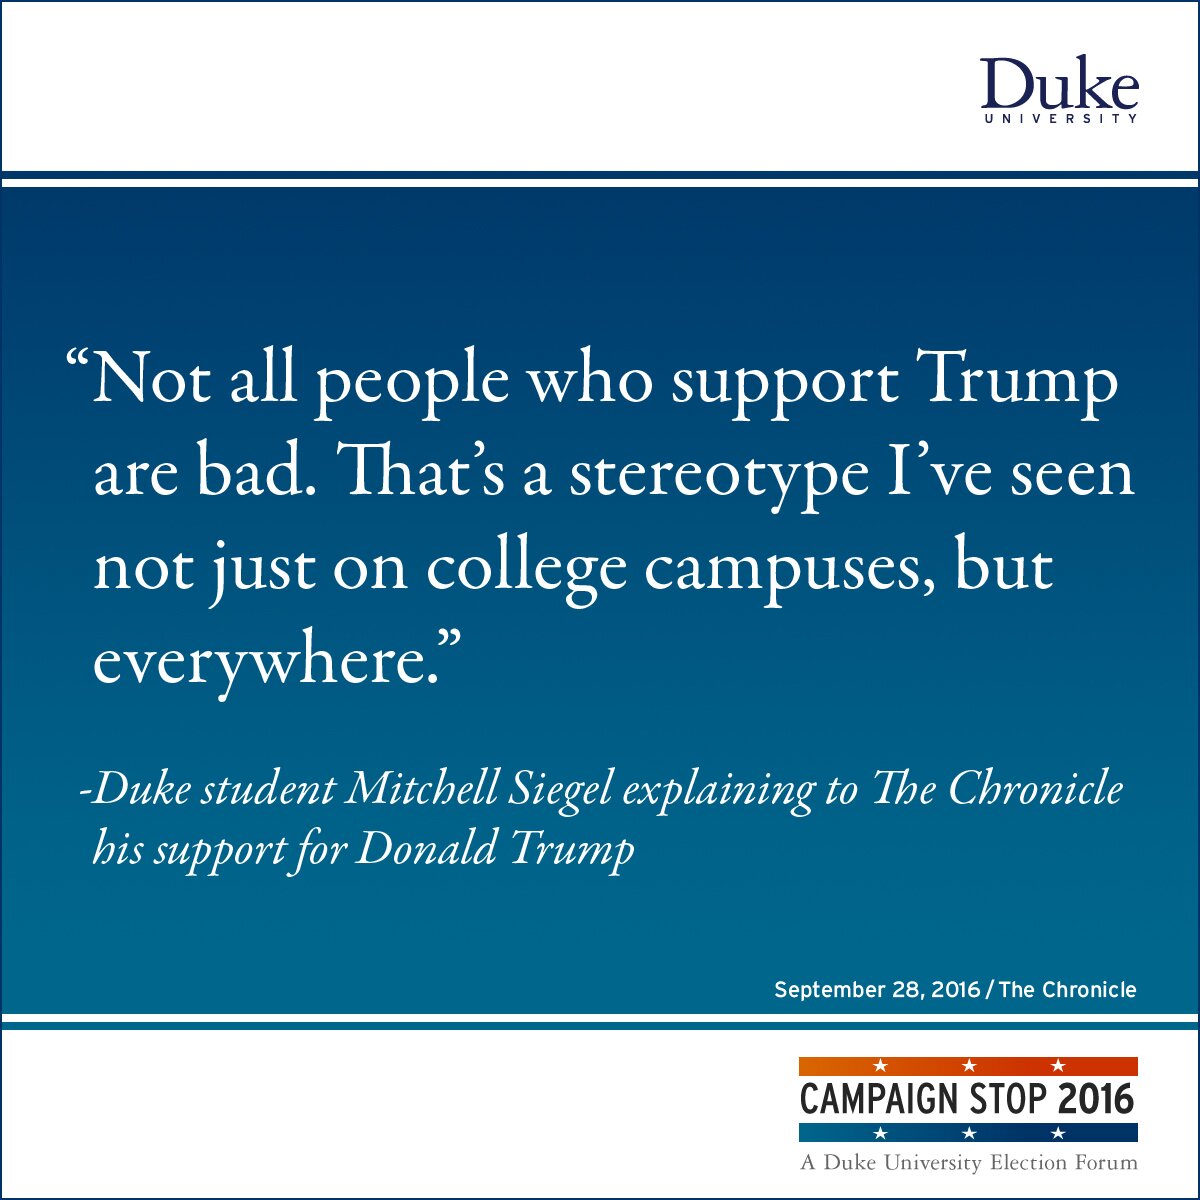 “Not all people who support Trump are bad. That’s a stereotype I’ve seen not just on college campuses, but everywhere.” -Duke student Mitchell Siegel explaining to The Chronicle his support for Donald Trump